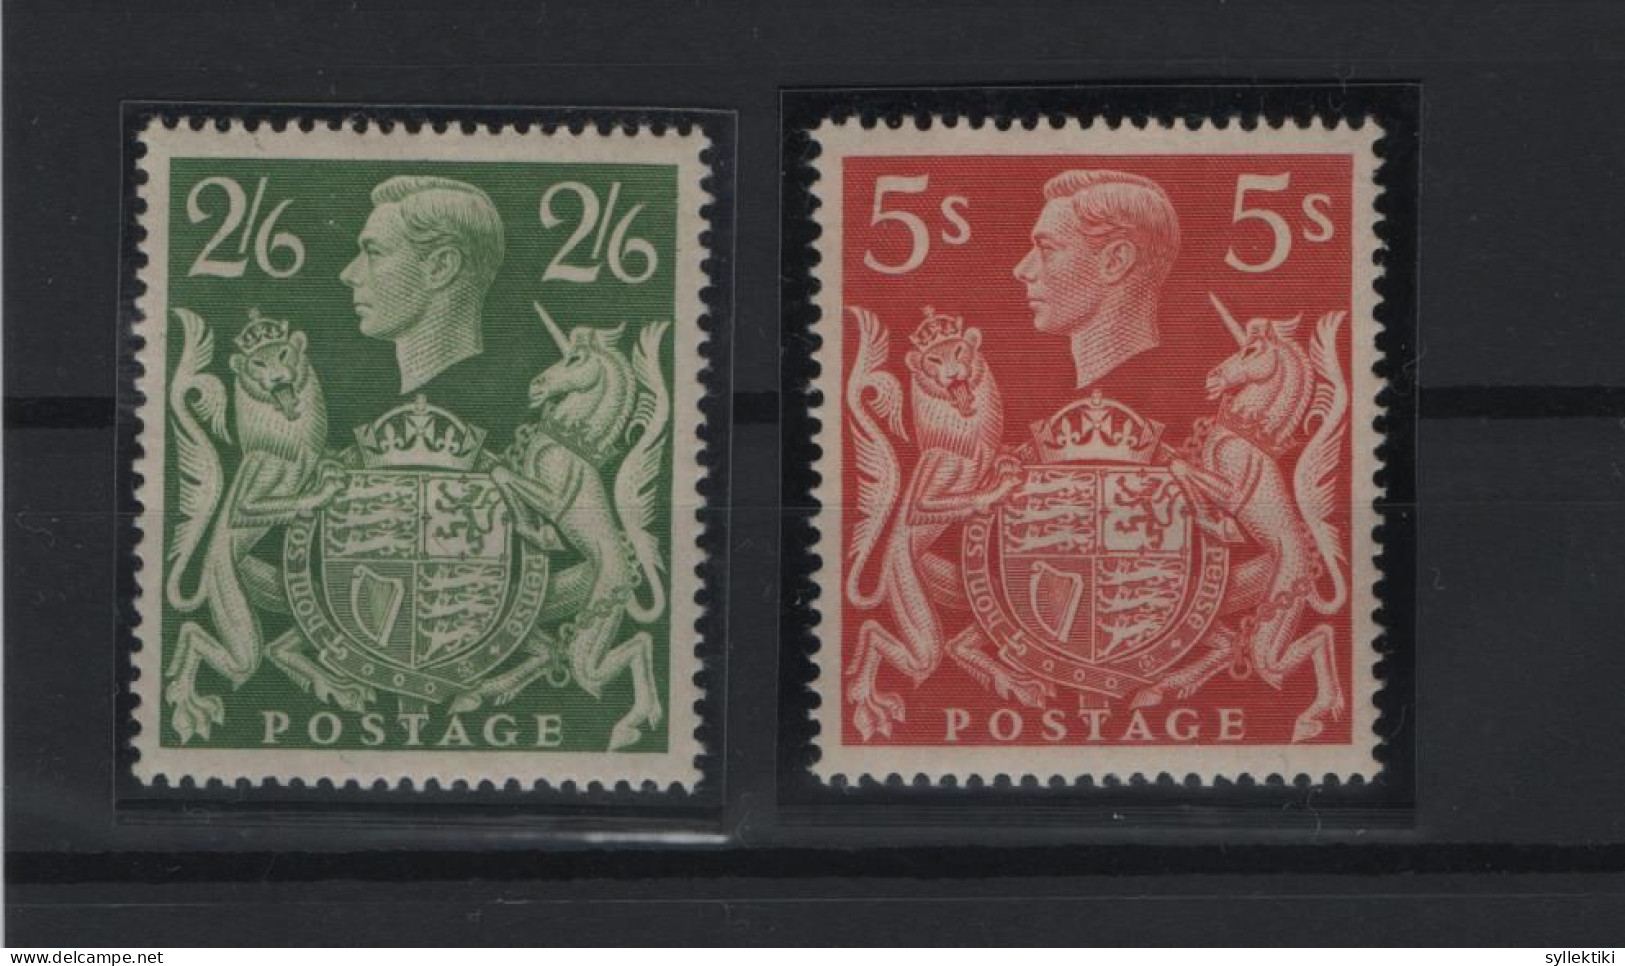 GREAT BRITAIN 1939 KGVI 2/6 & 5 SHILLINGS 2 DIFFERENT MNH STAMPS  STANLEY GIBBONS N 476b, 477  AND VALUE GBP 35.00 - Neufs